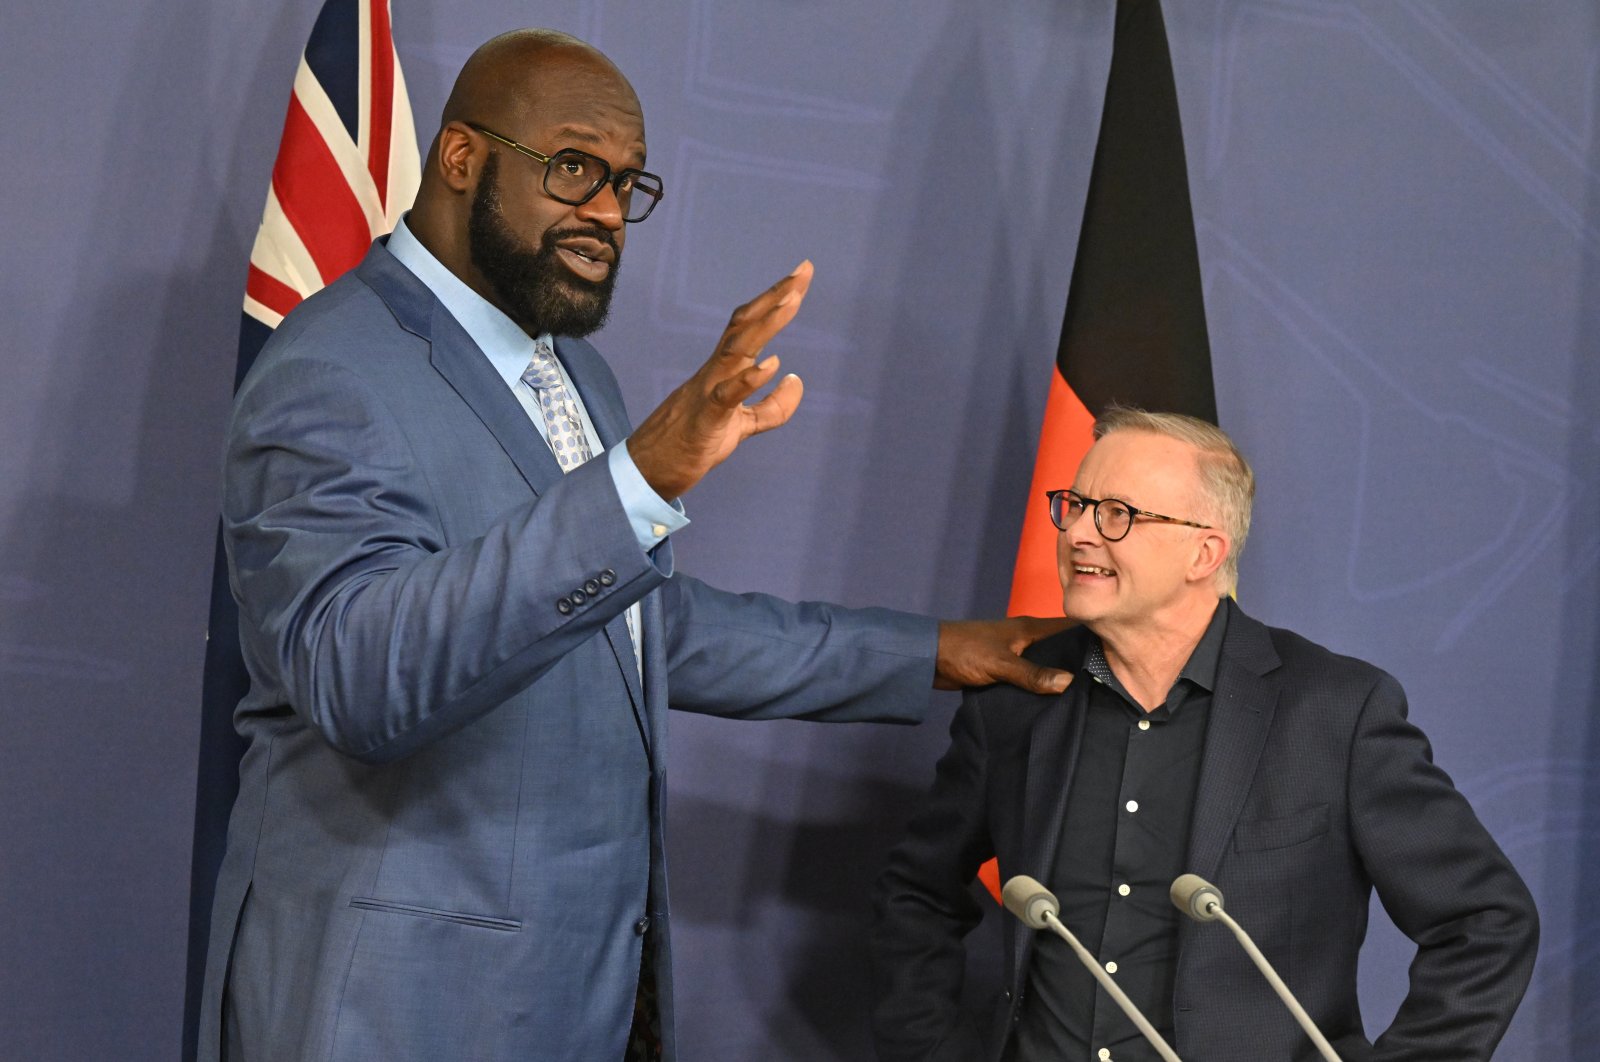 Australian Prime Minister Anthony Albanese (R) and former NBA star Shaquille O’Neal exchange greetings at a press conference in Sydney, Australia, Aug. 27, 2022. (EPA Photo)